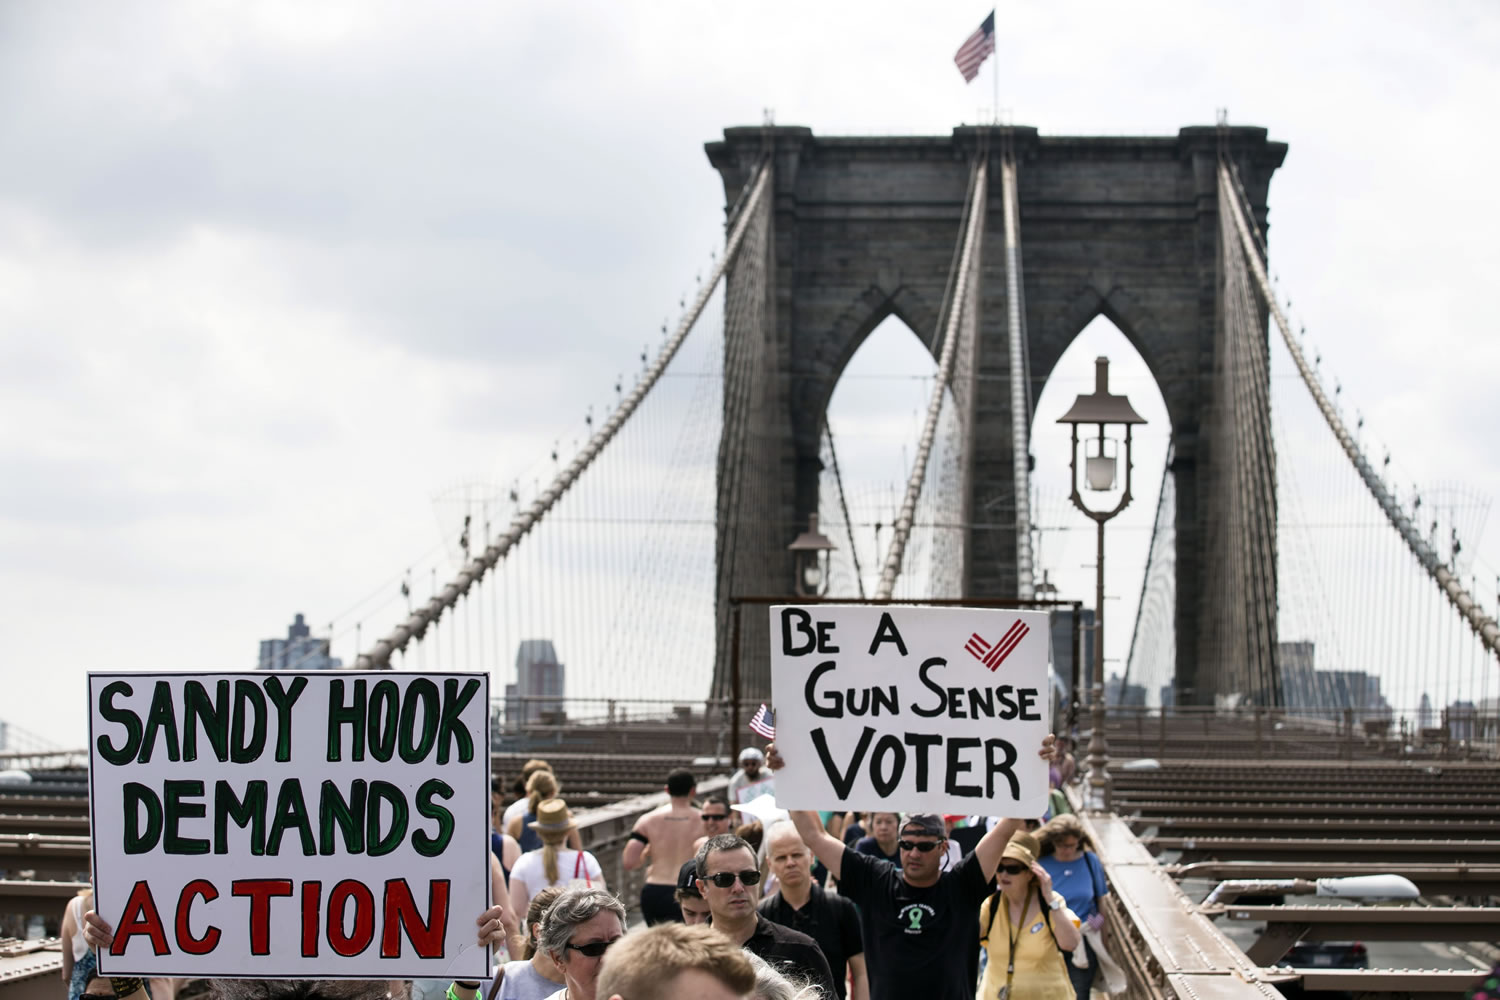 Demonstrators raise posters as they march across the Brooklyn Bridge to call for tougher gun control laws, Saturday in New York.